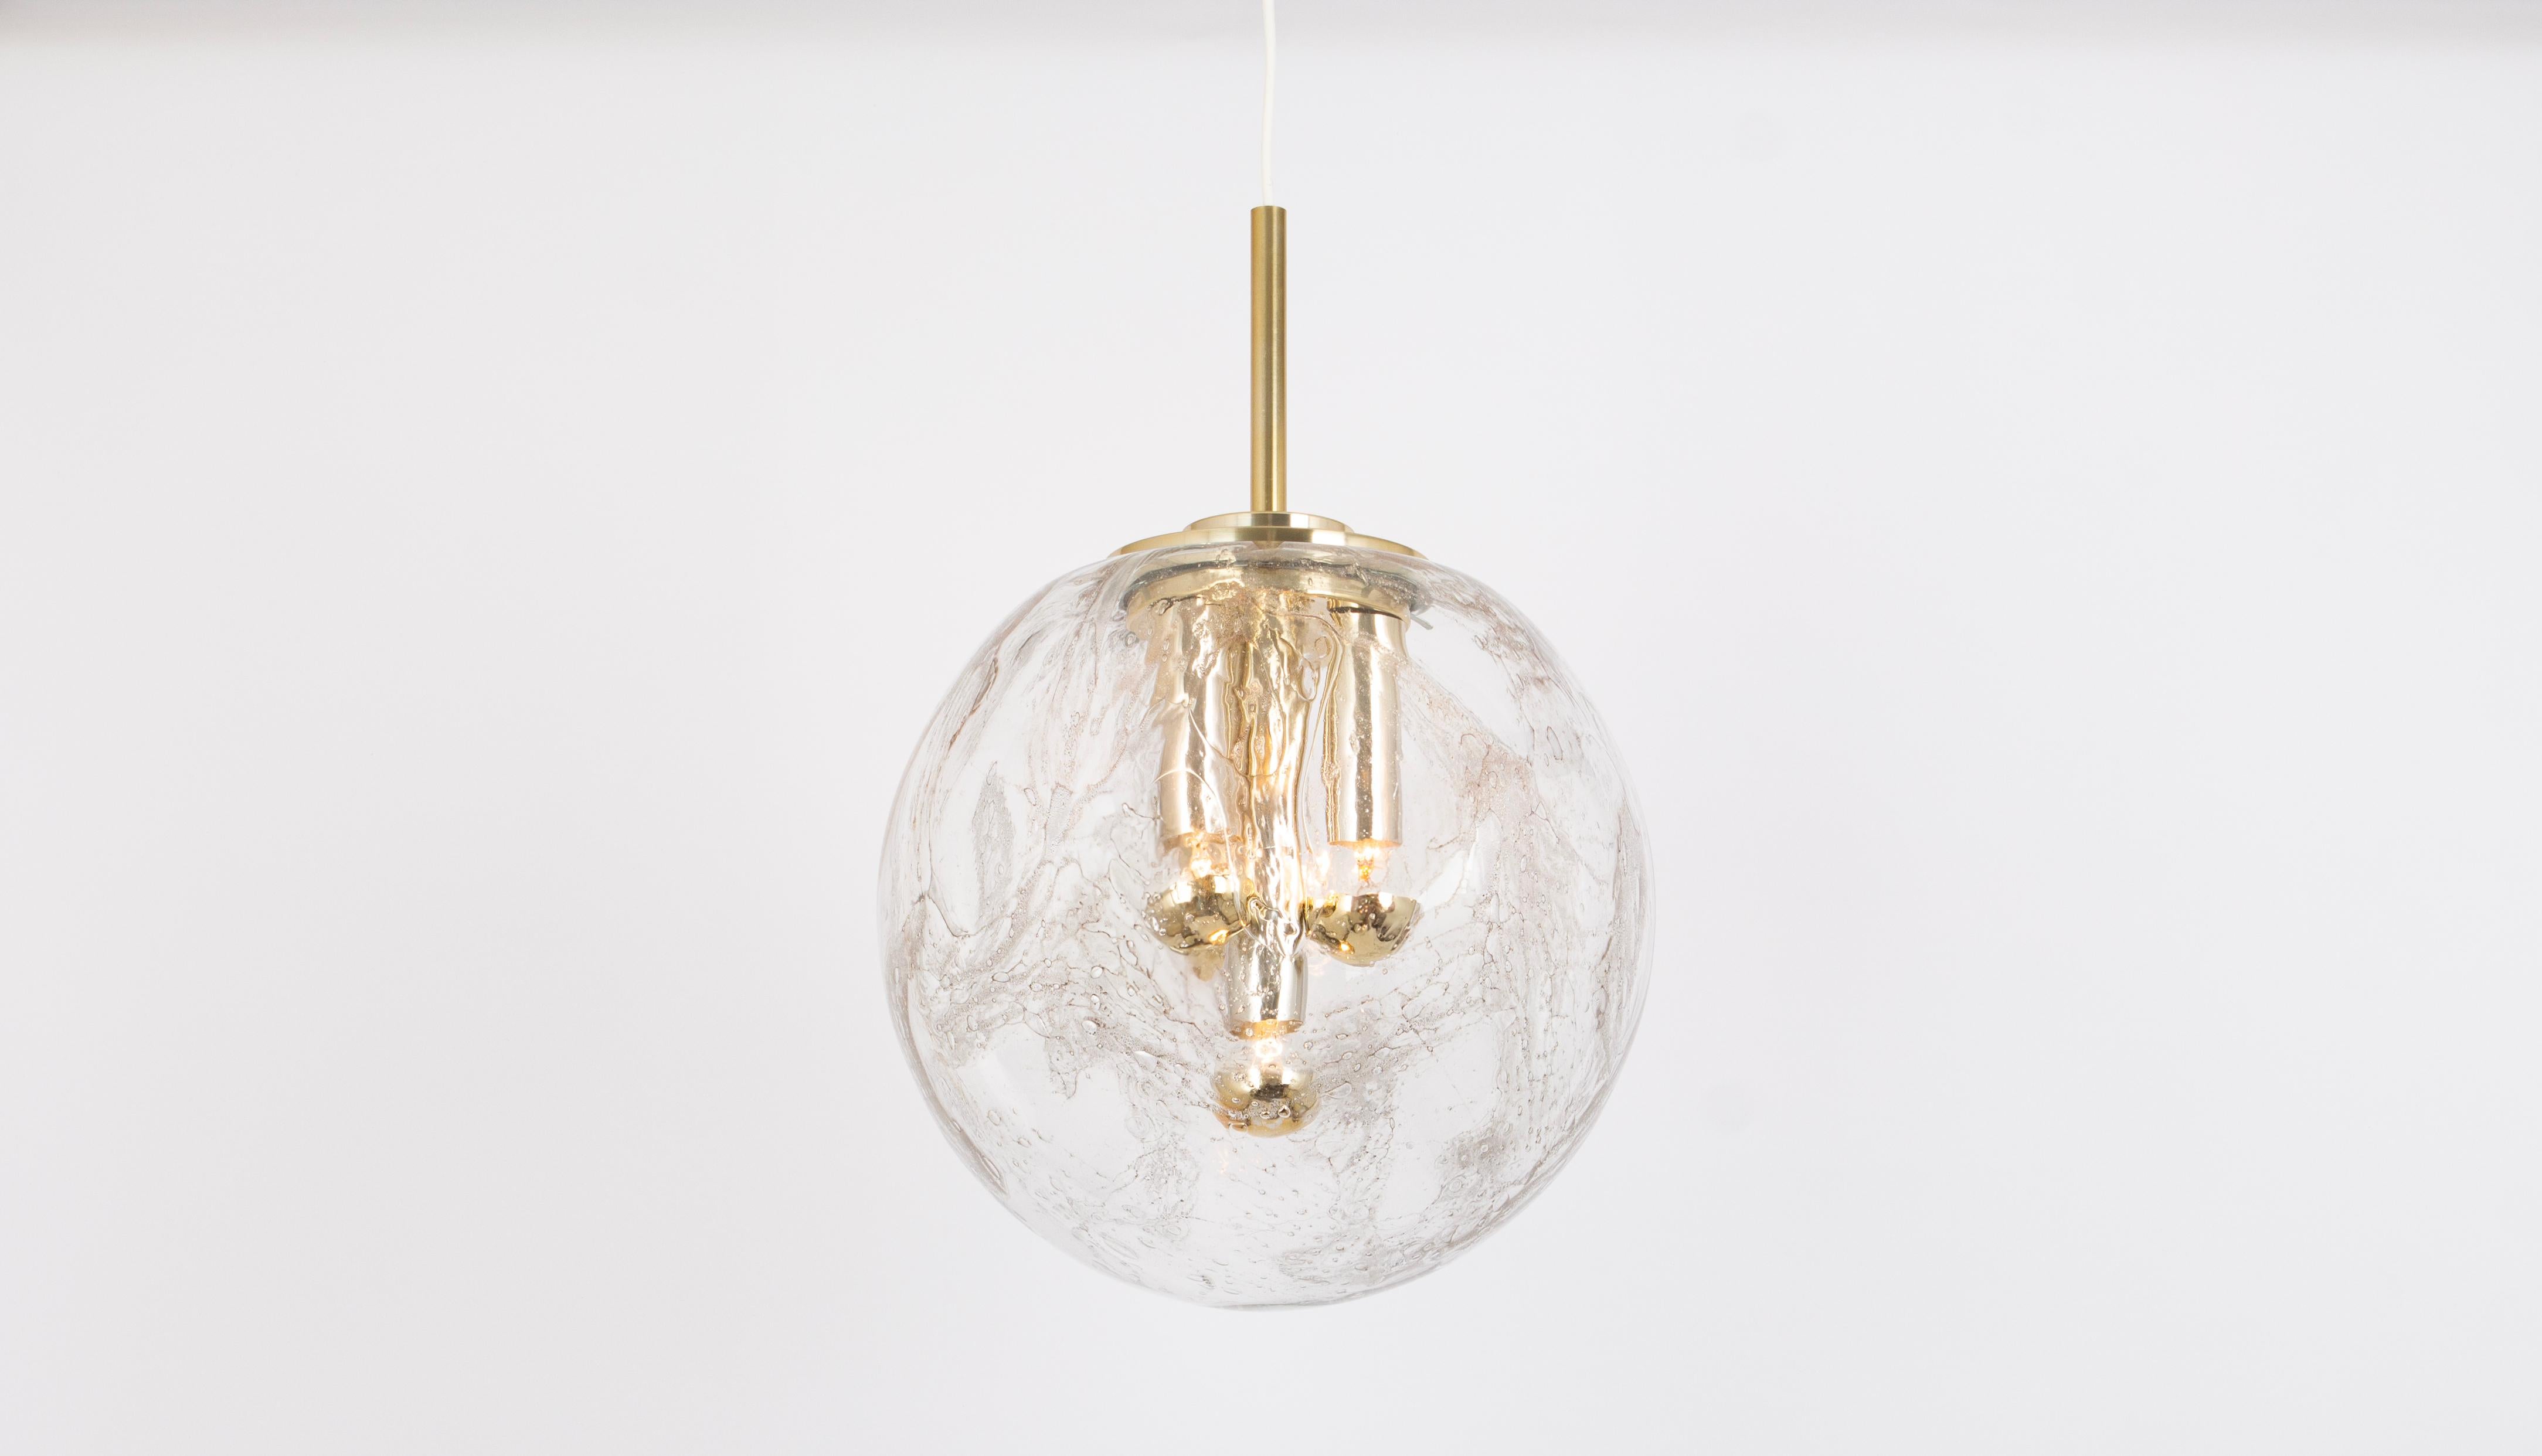 1 of 2 stunning Doria ceiling lights with large volcanic Murano crystal glass dome
The frame is made of brass and aluminum parts, in gold and chrome colors. 

High quality and in very good condition. Cleaned, well-wired and ready to use. 

The